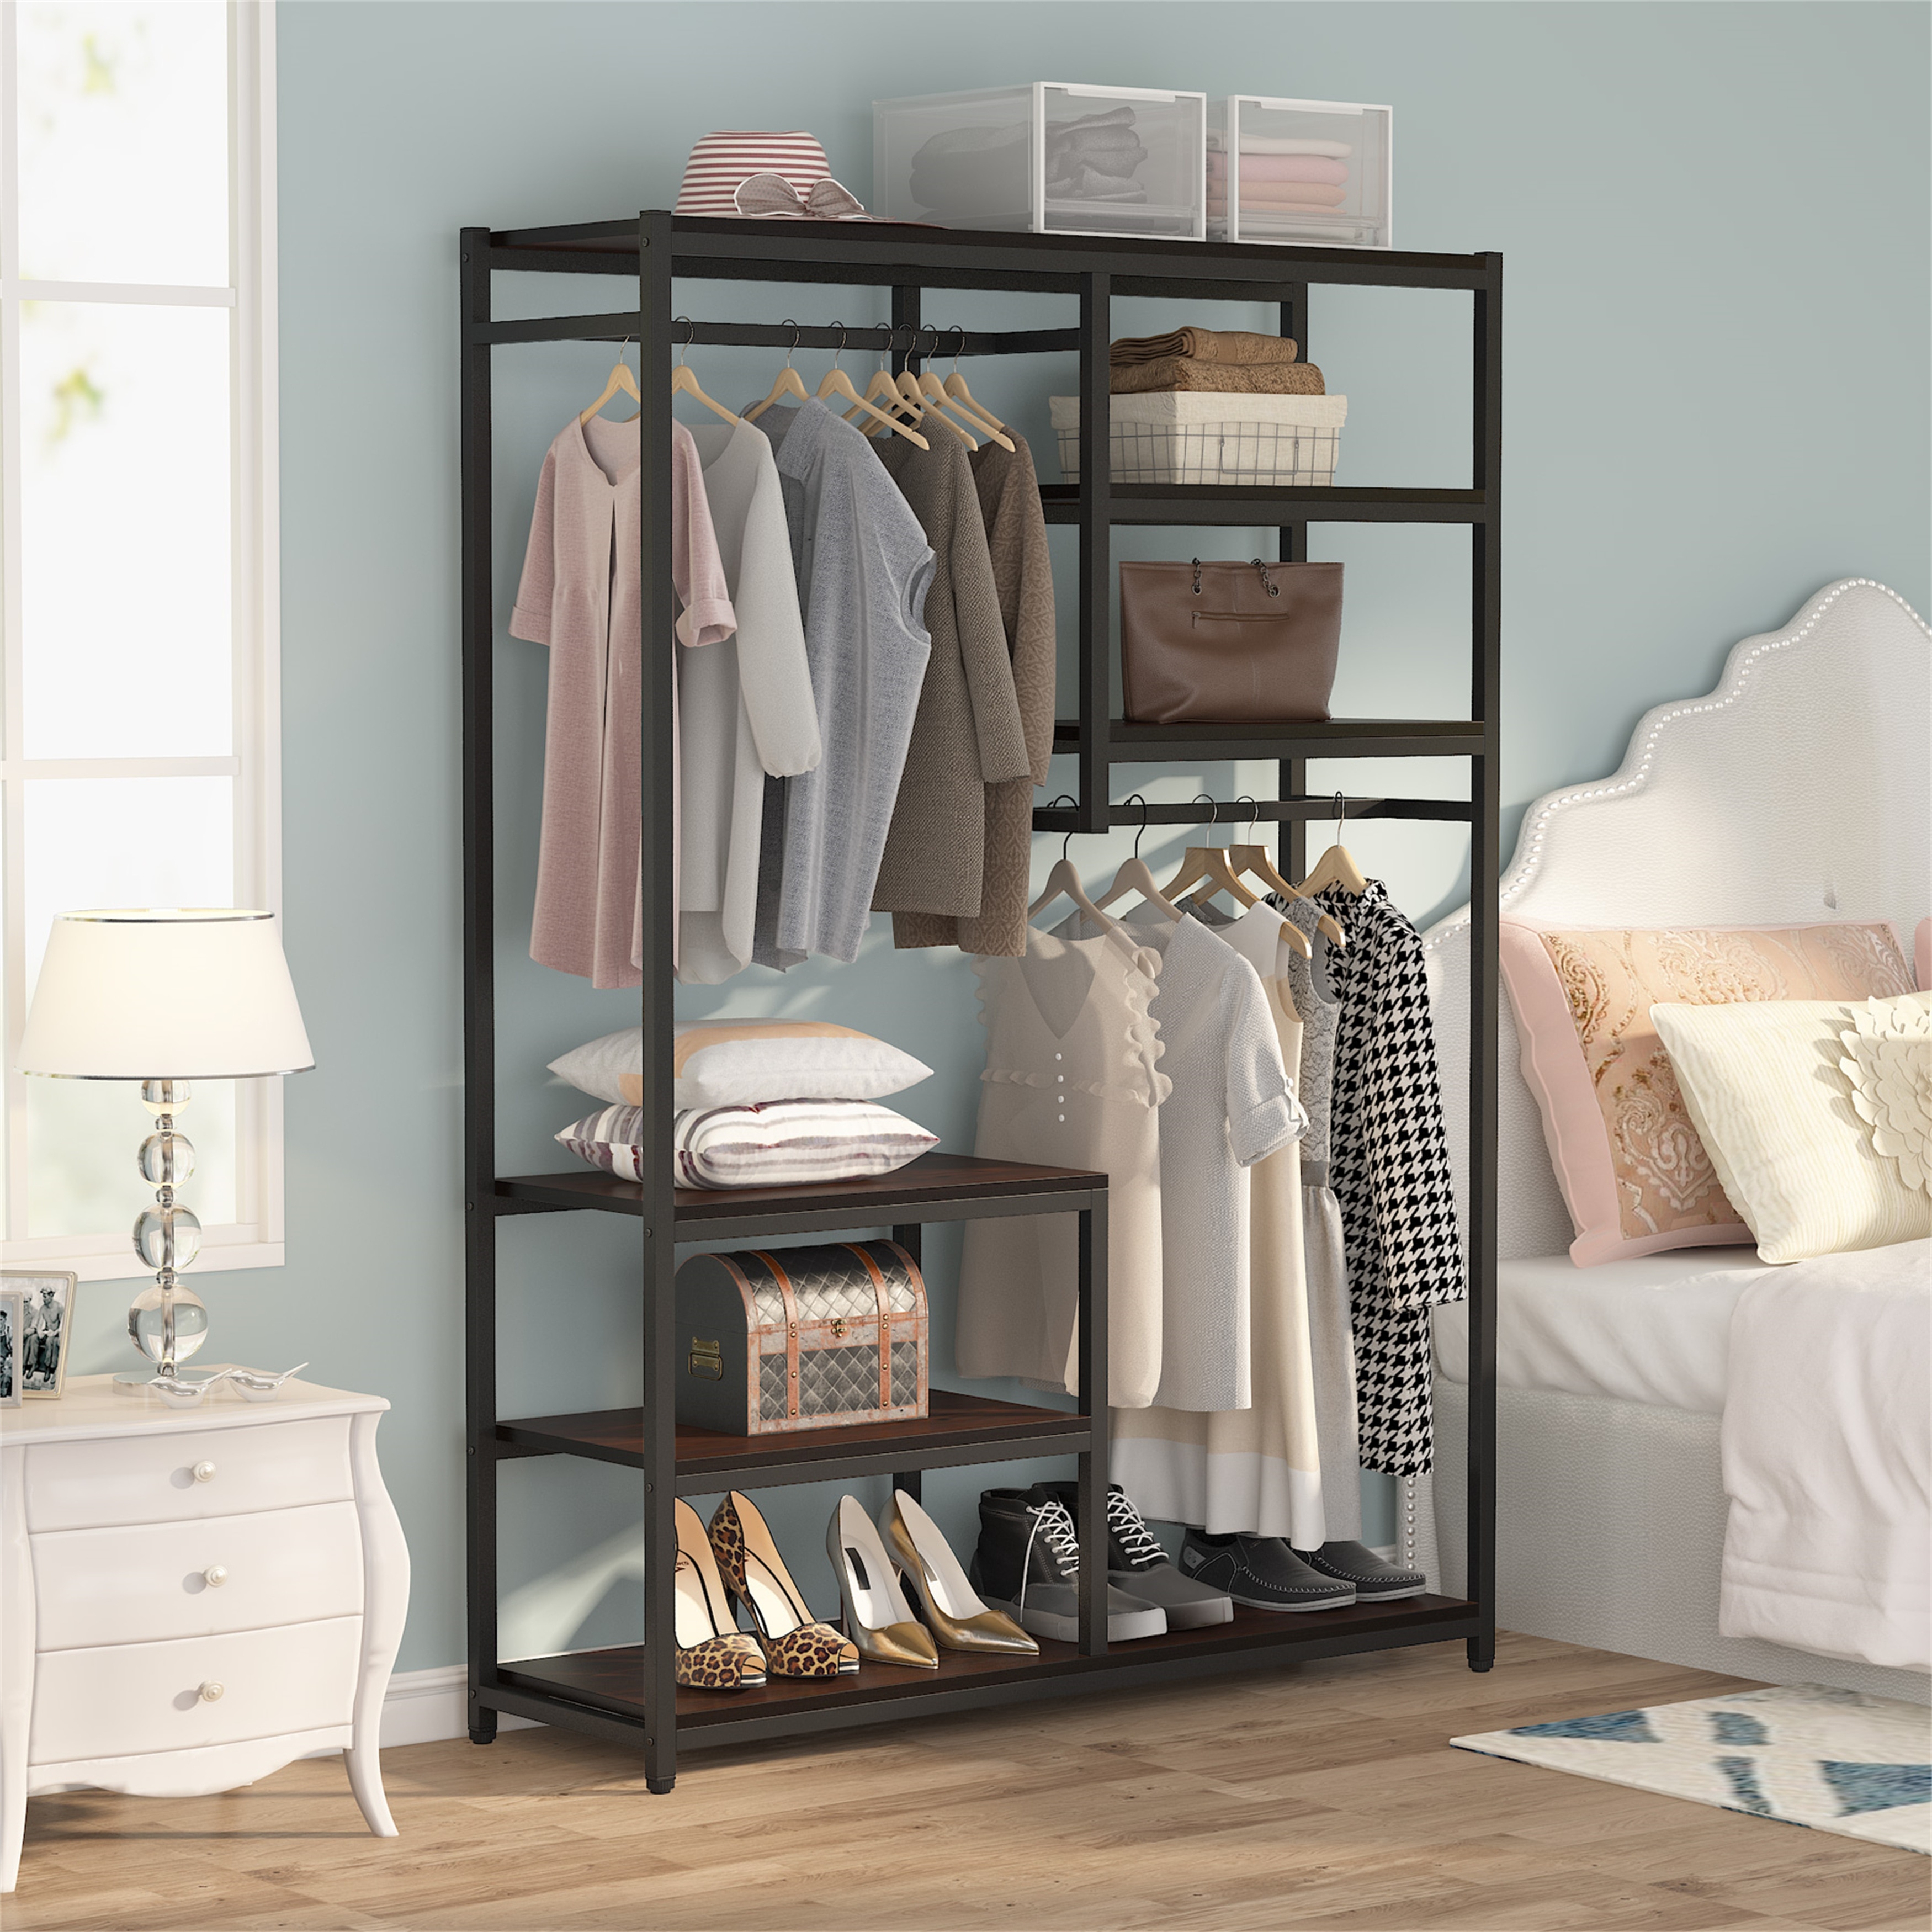 https://ak1.ostkcdn.com/images/products/is/images/direct/e6bb3d25c0144cab89eb7ea0a08677ae585ad897/Brown--Black-Industrial-Freestanding-Clothes-Garment-Racks-closet-Organizer-with-Double-Hanging-Rod.jpg